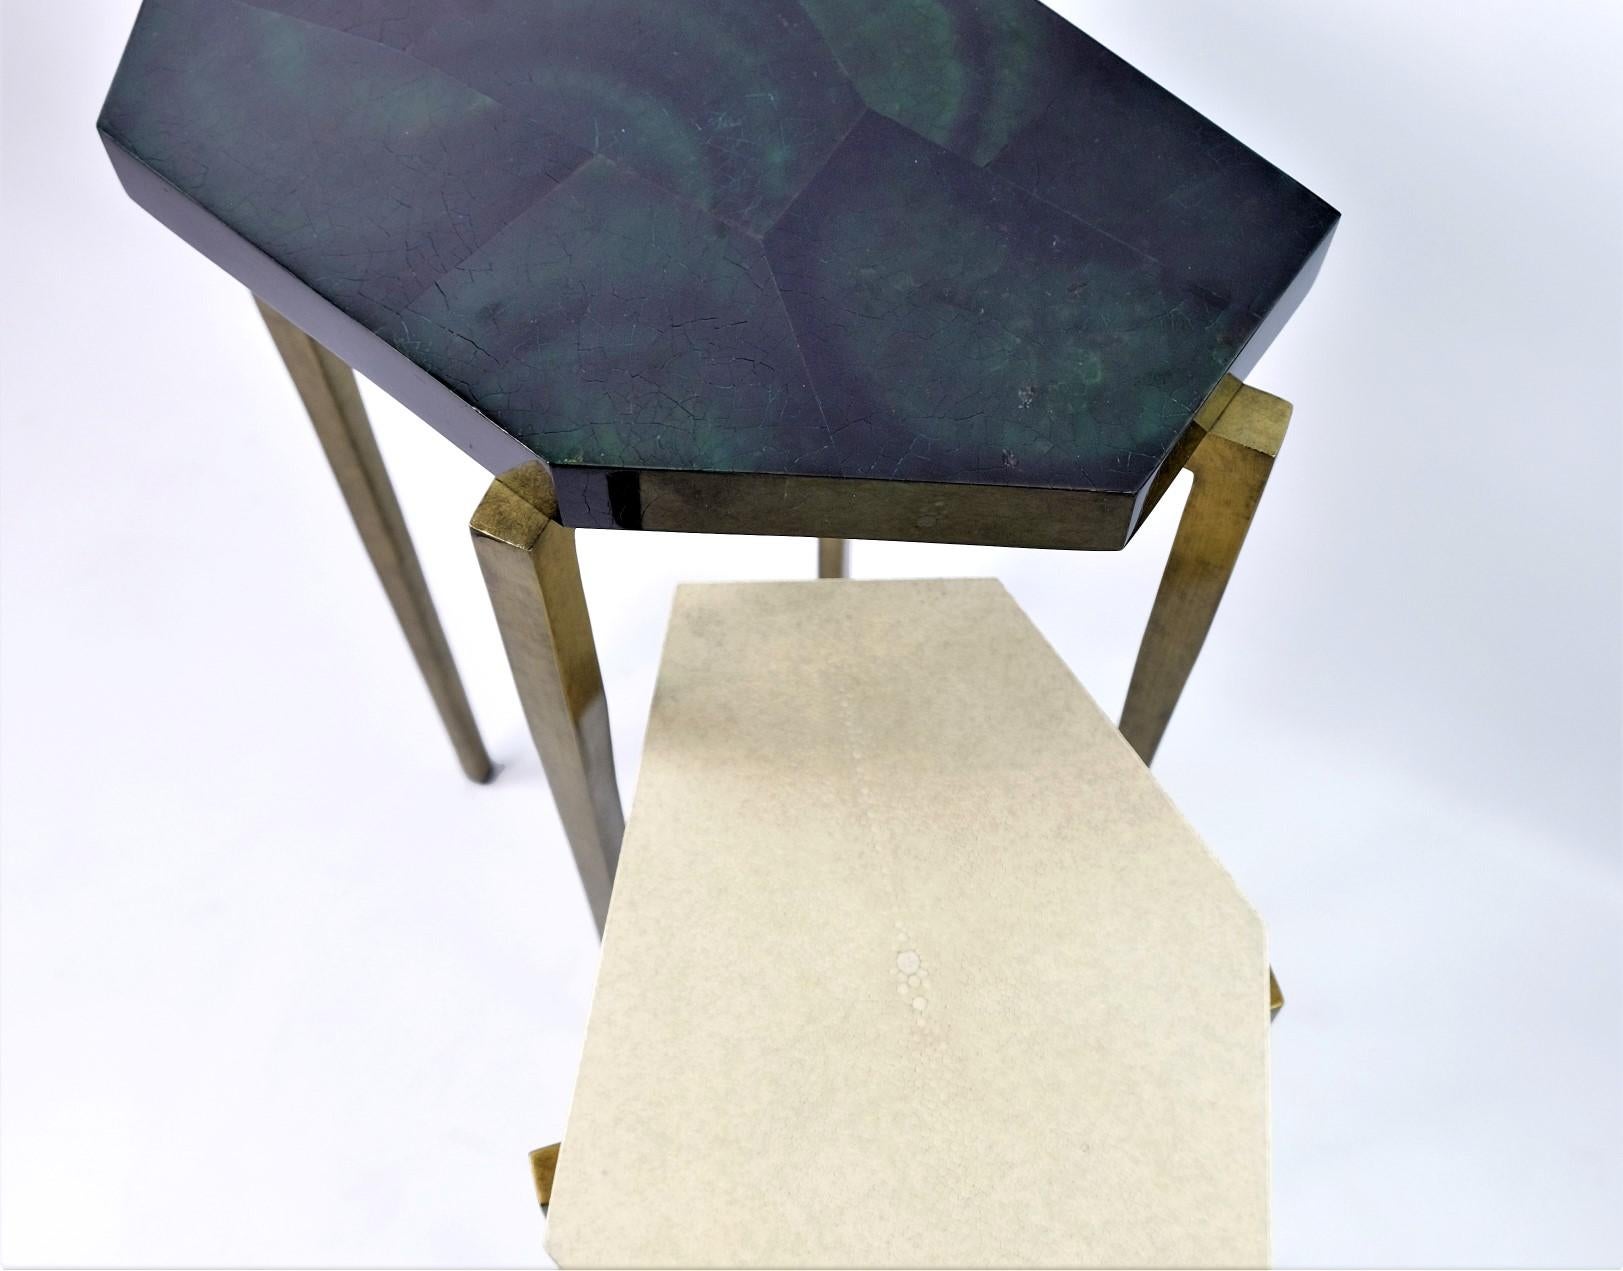 These futurist nesting tables are made of natural shagreen (Our ref ANTIC) and polished green penshell marquetry.

They have a polygonal shape top and the feet have an antique brass patina.

The tables are small and very versatile. These can be